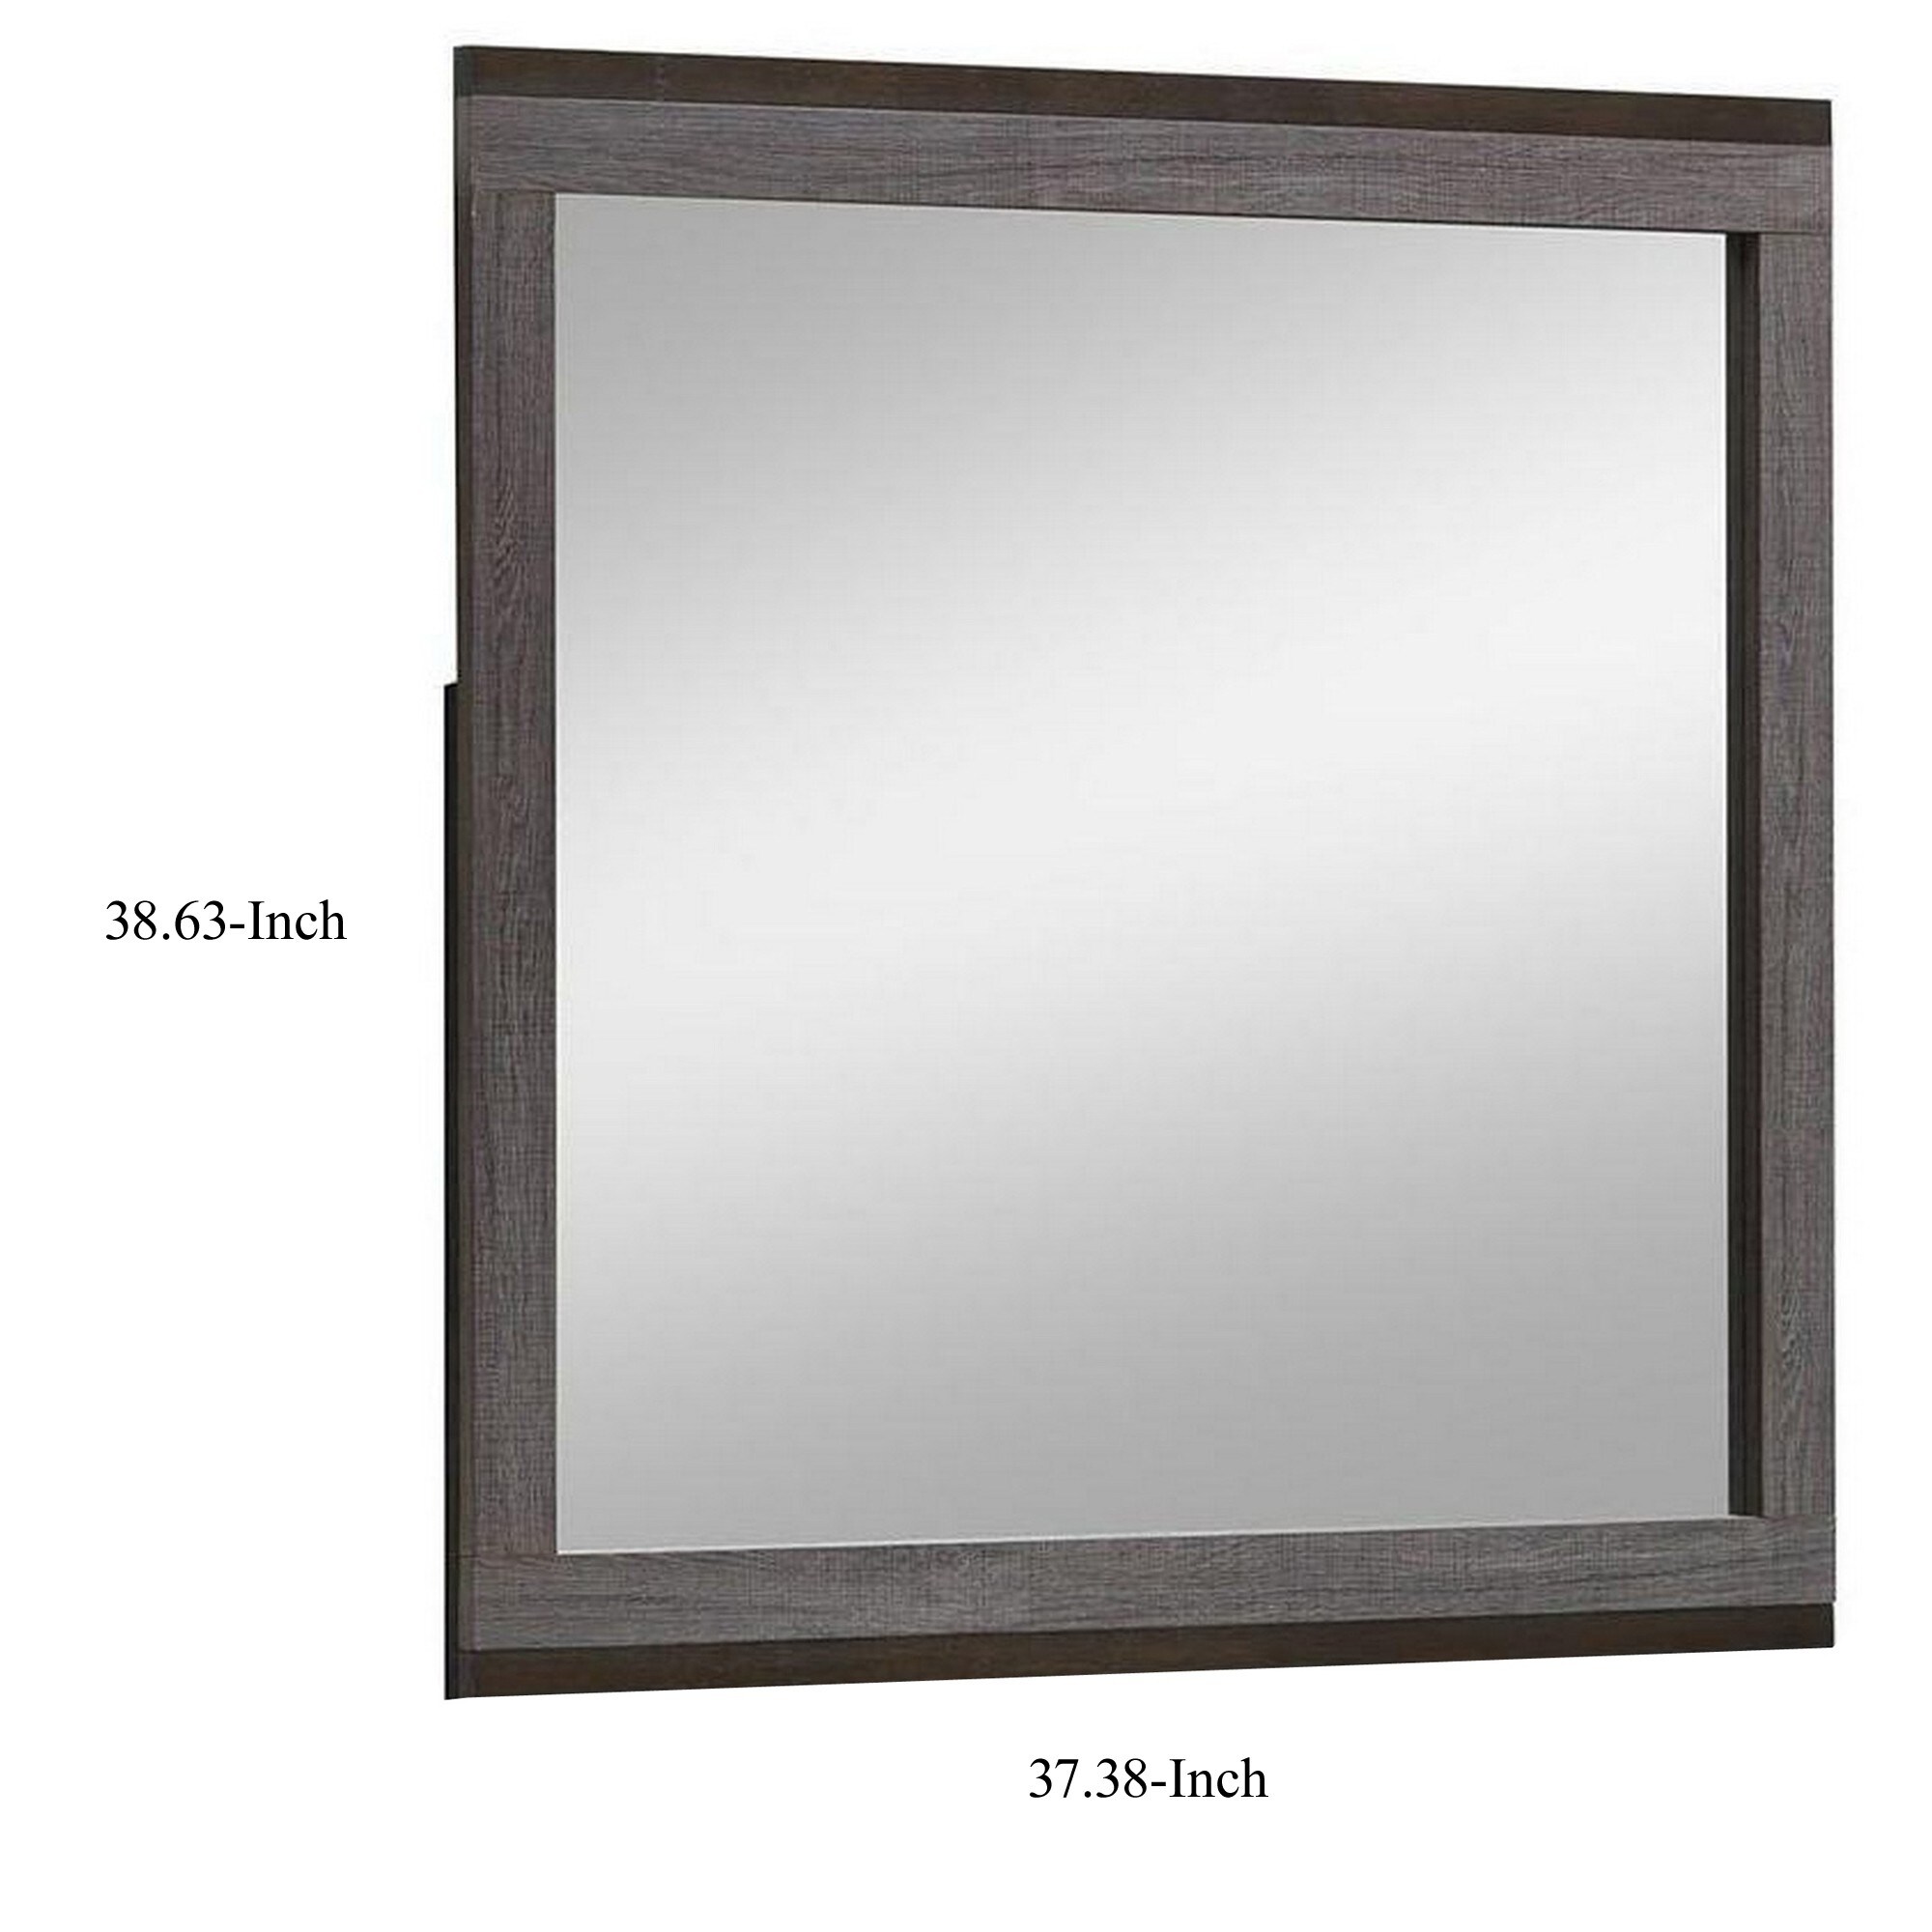 Manvel Contemporary Mirror, Two-Tone Antique Gray - clear